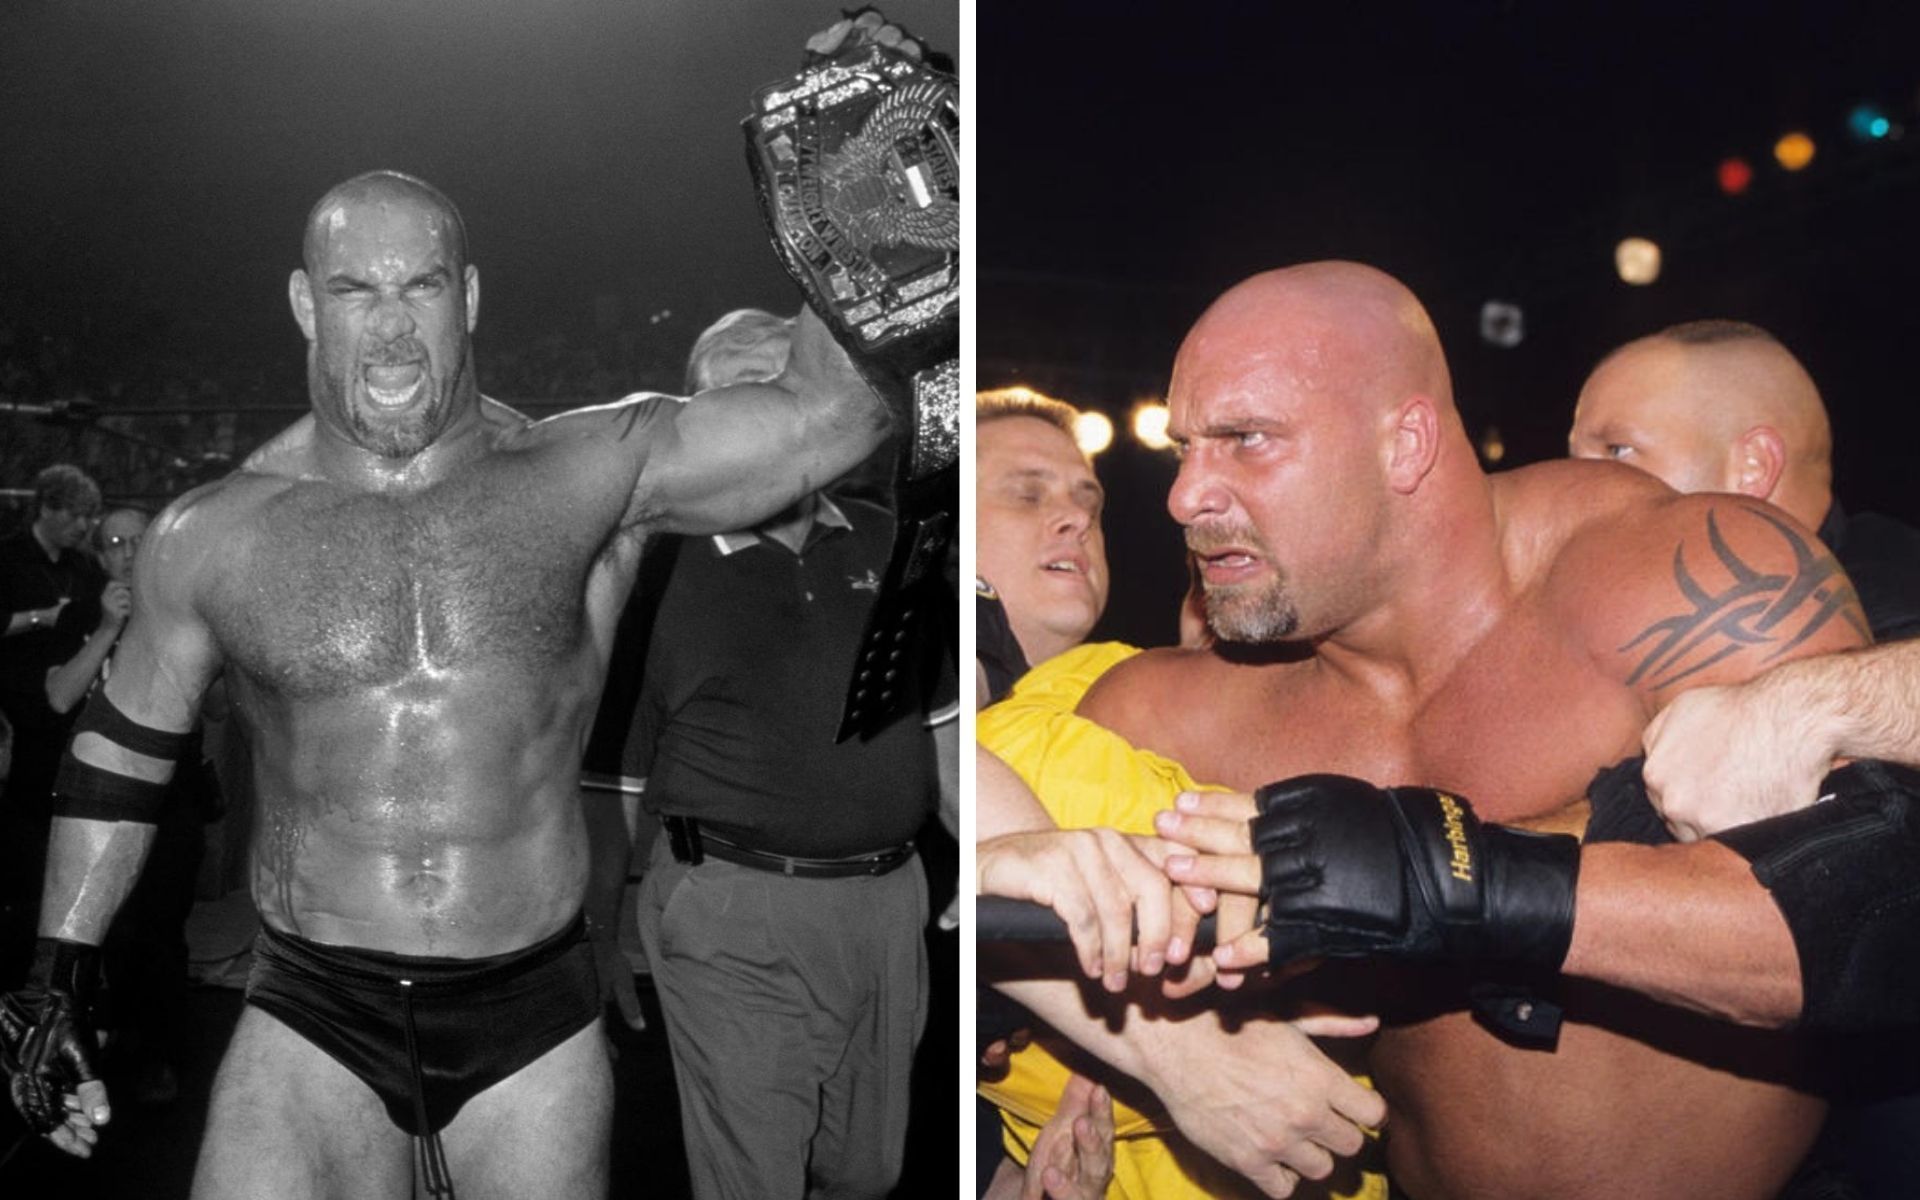 Goldberg is a former 4-time world champion